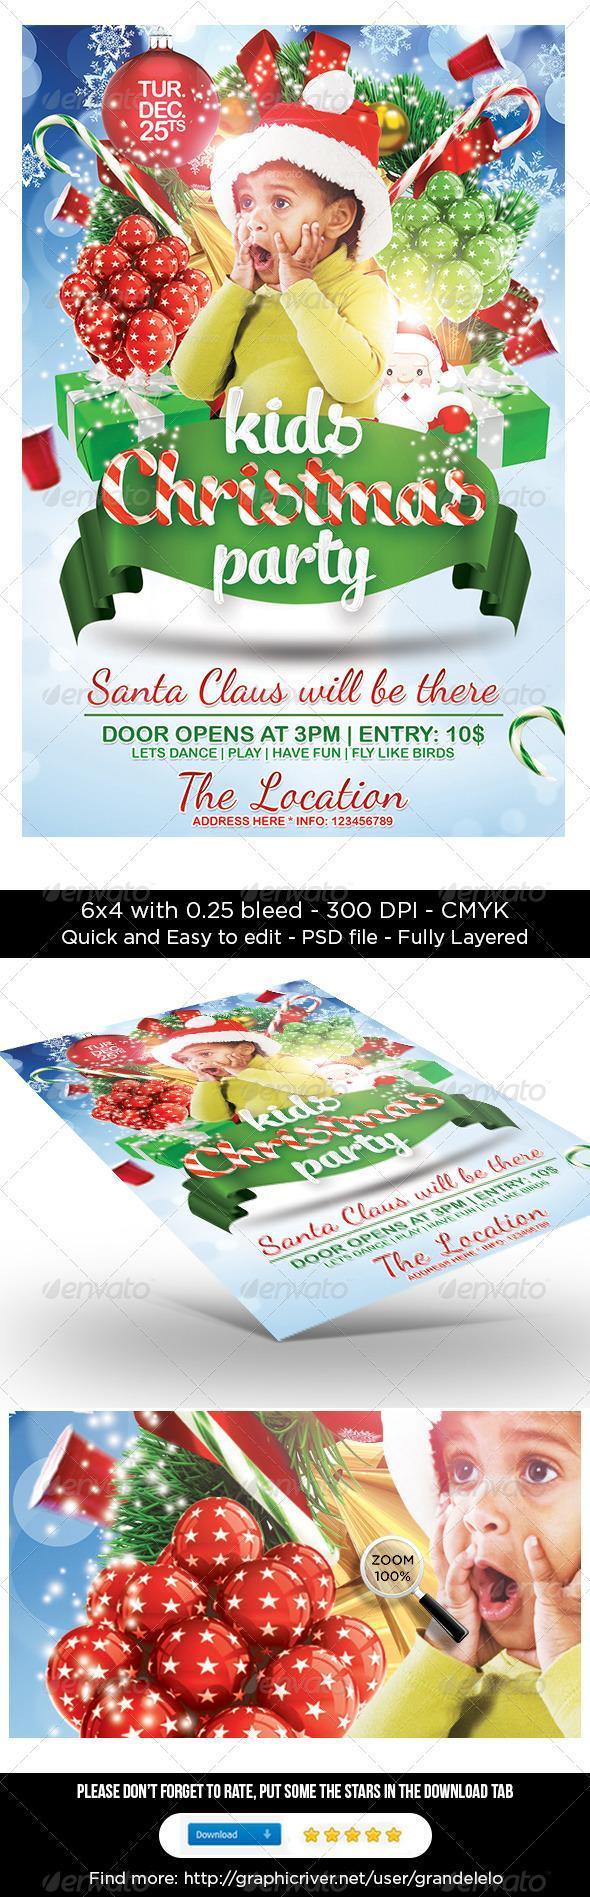 Kids Party Flyer Christmas